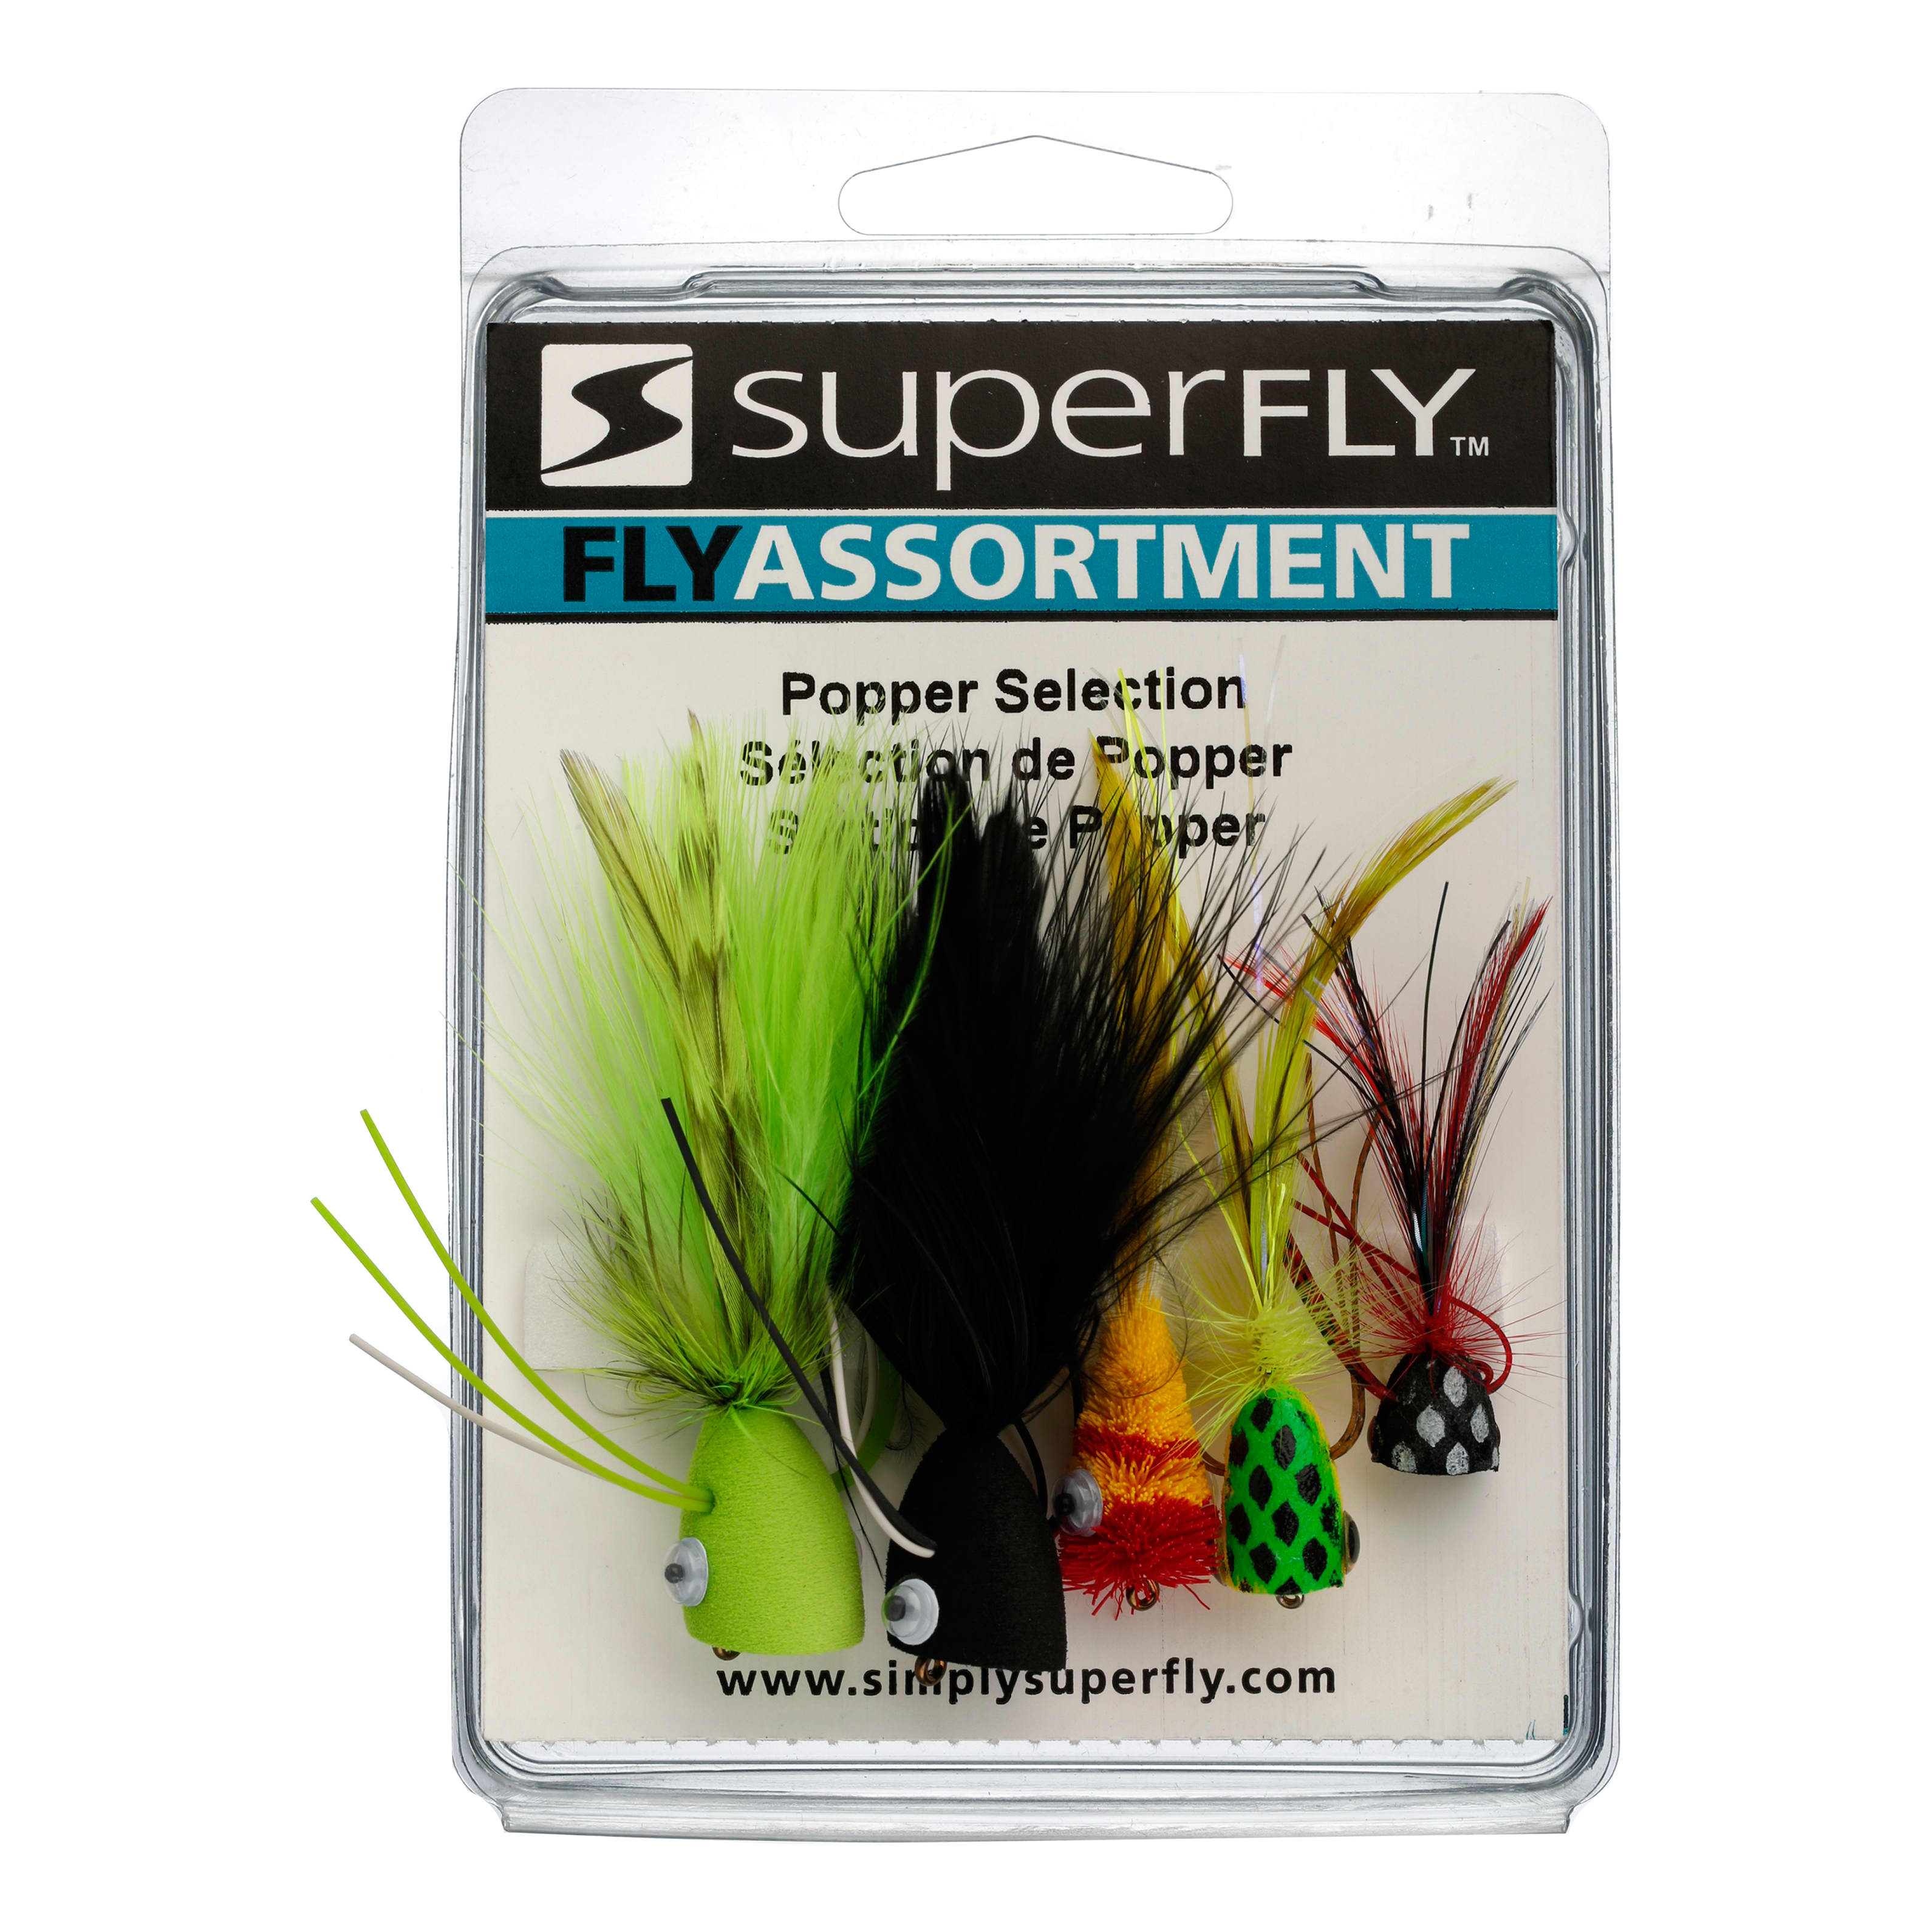 Superfly Premium Popper Selection - Cabelas - SUPERFLY - Flies